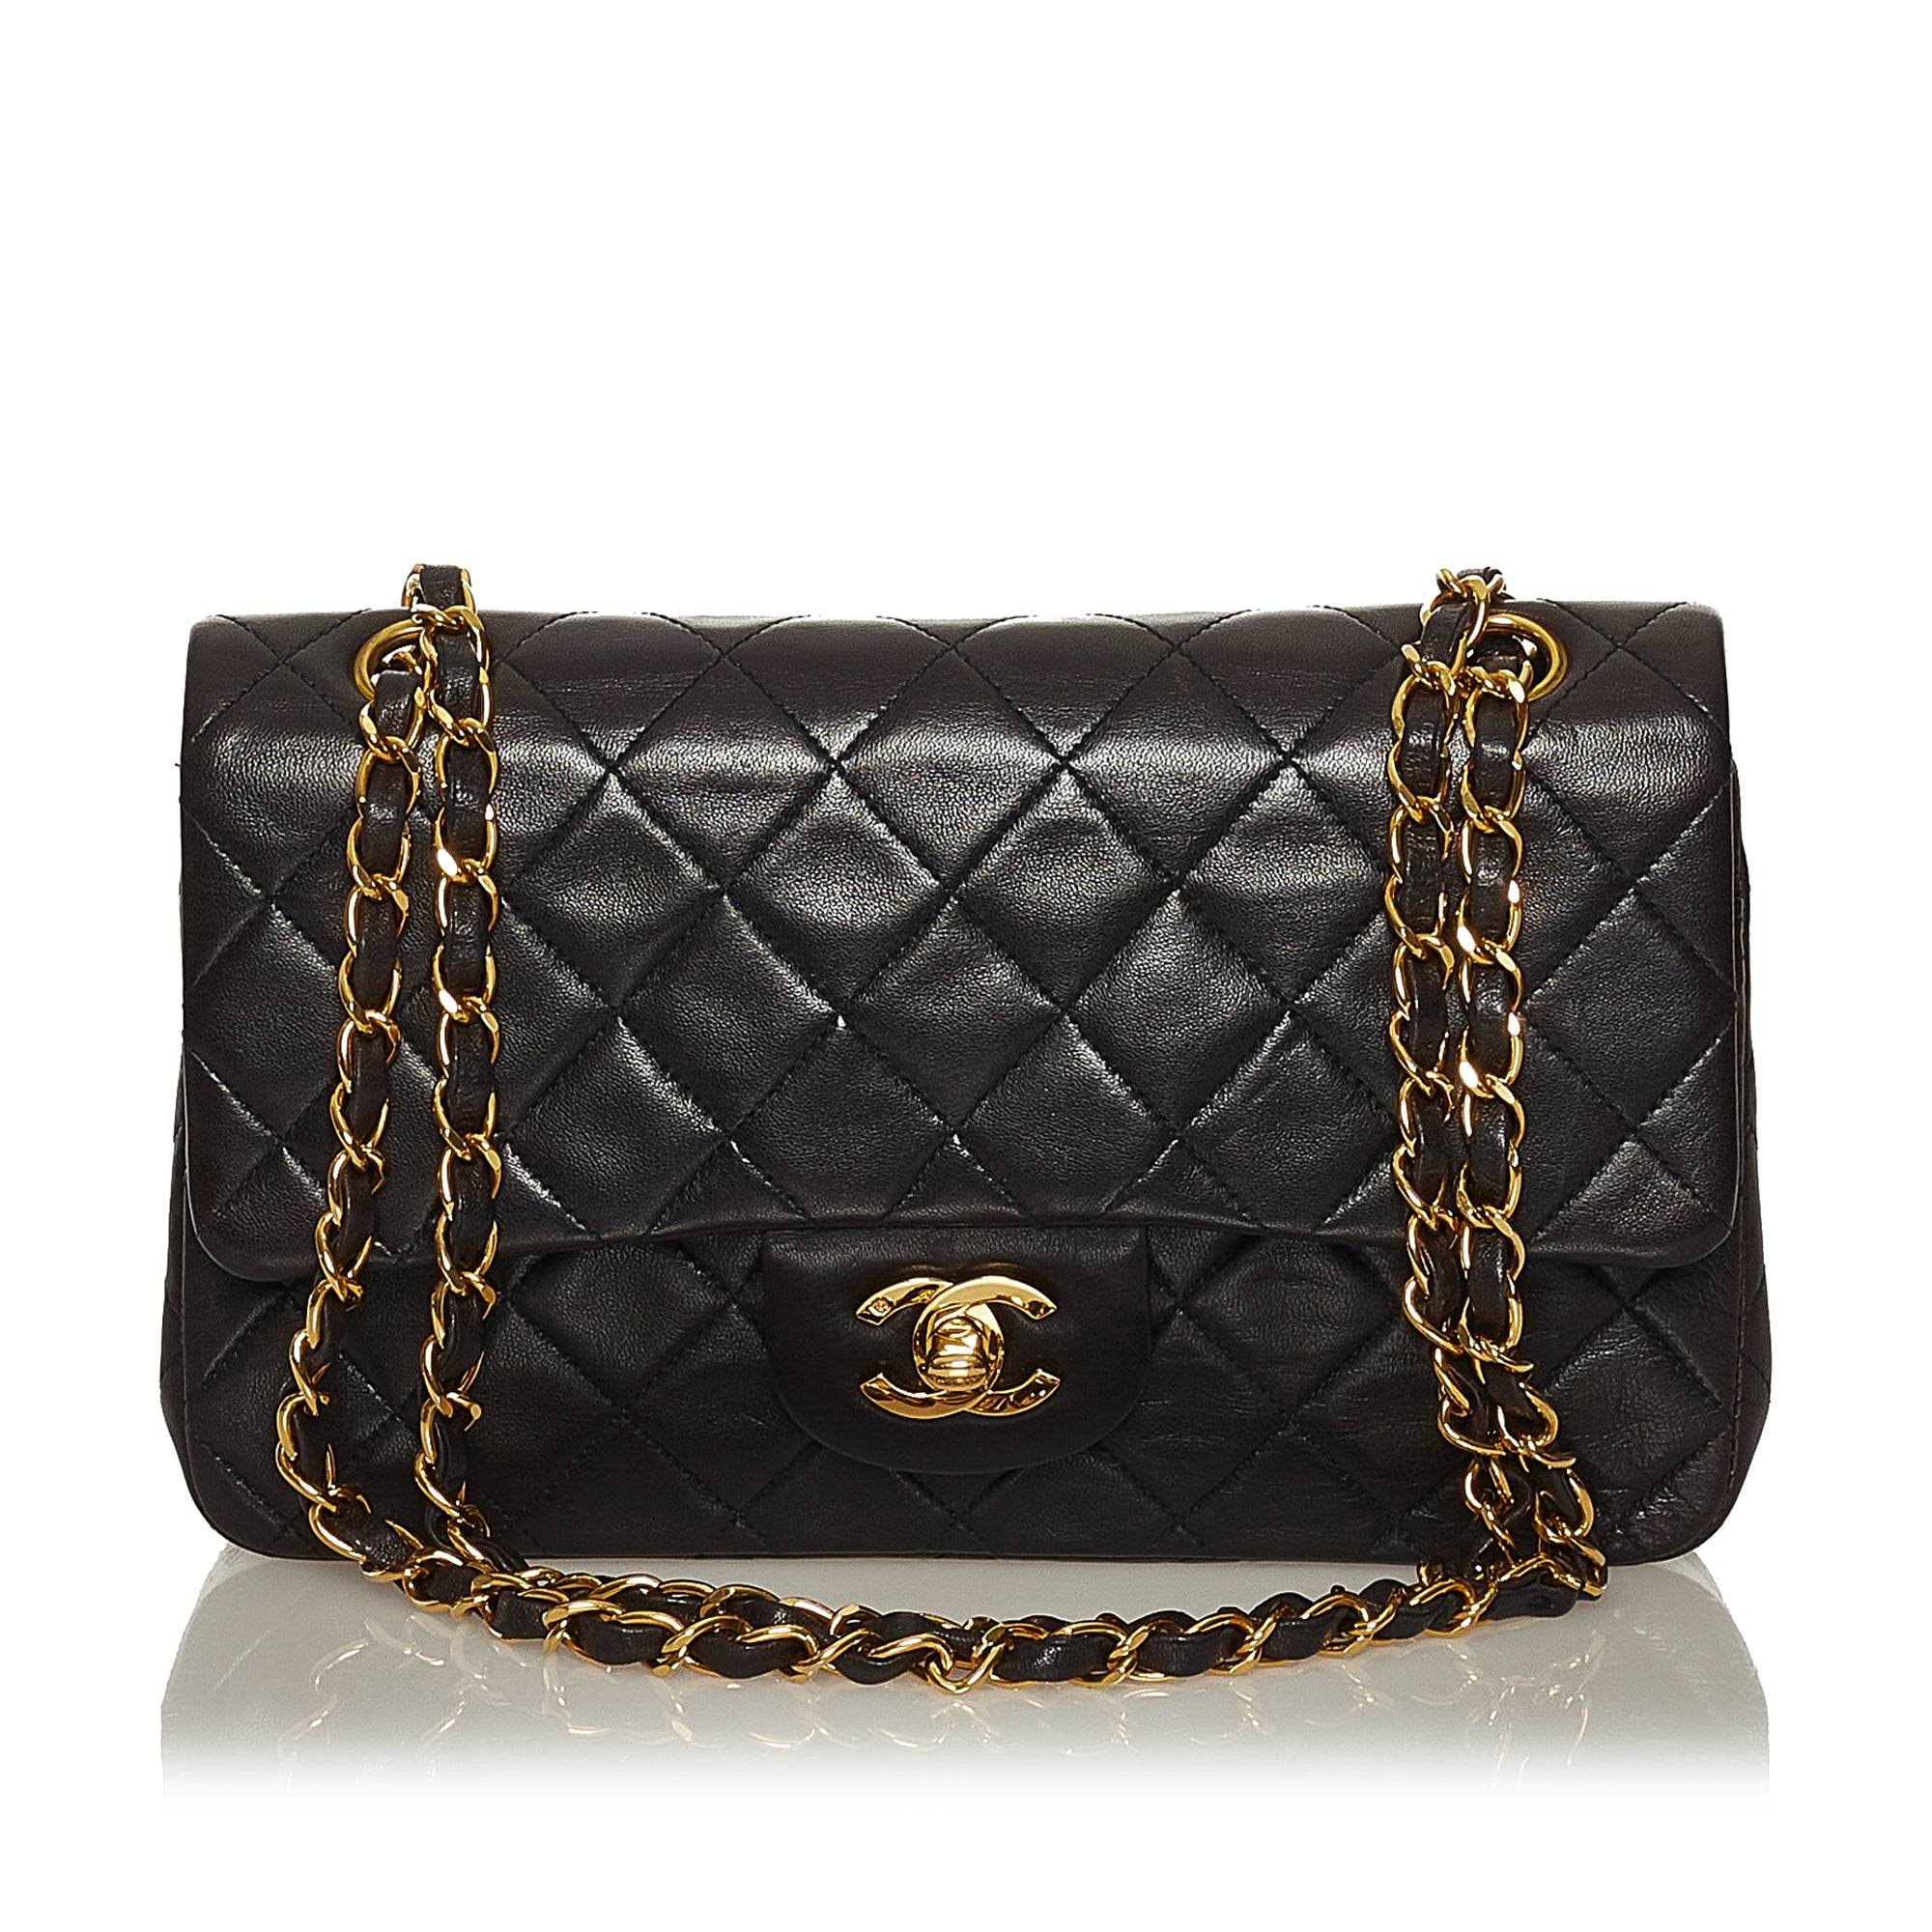 Chanel 4 Vintage Chanel 2.55 9 Double Flap Black Quilted Leather